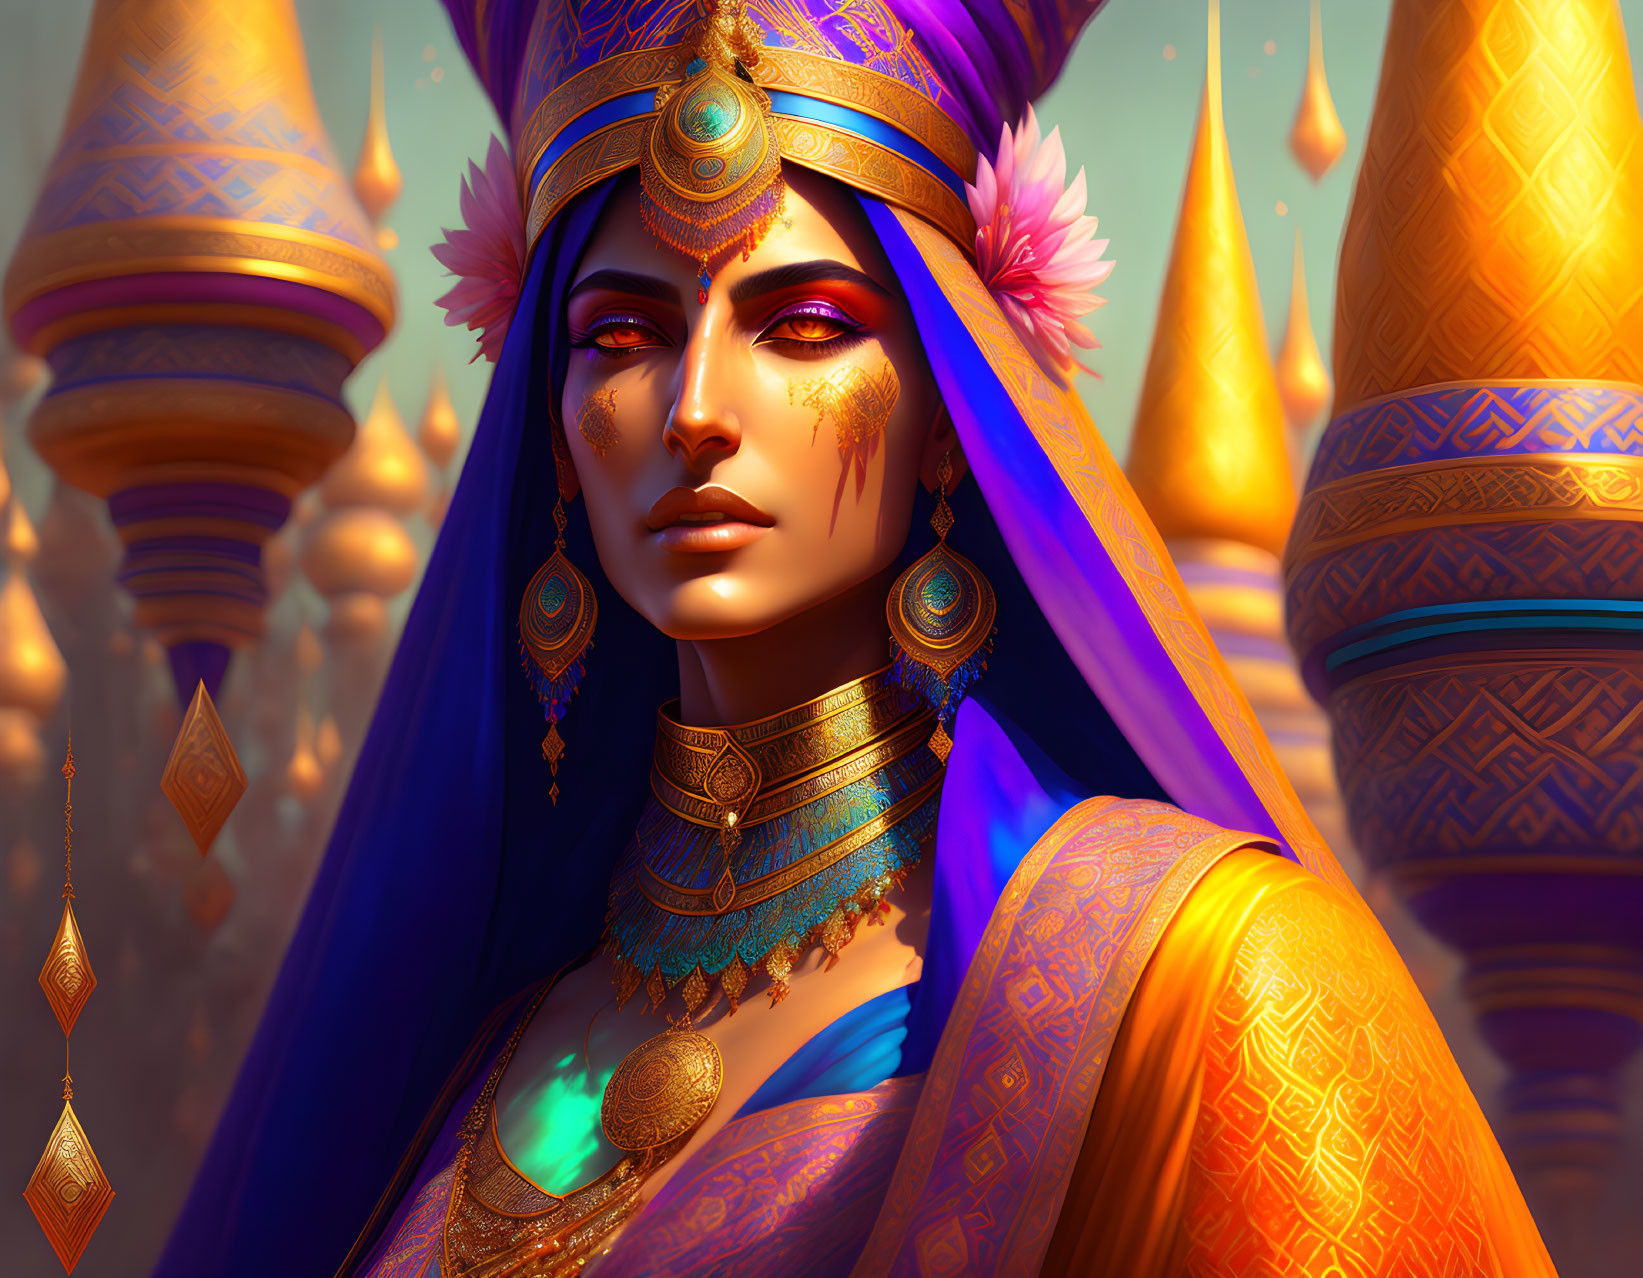 Regal woman in blue and gold sari with headpiece and earrings against golden towers